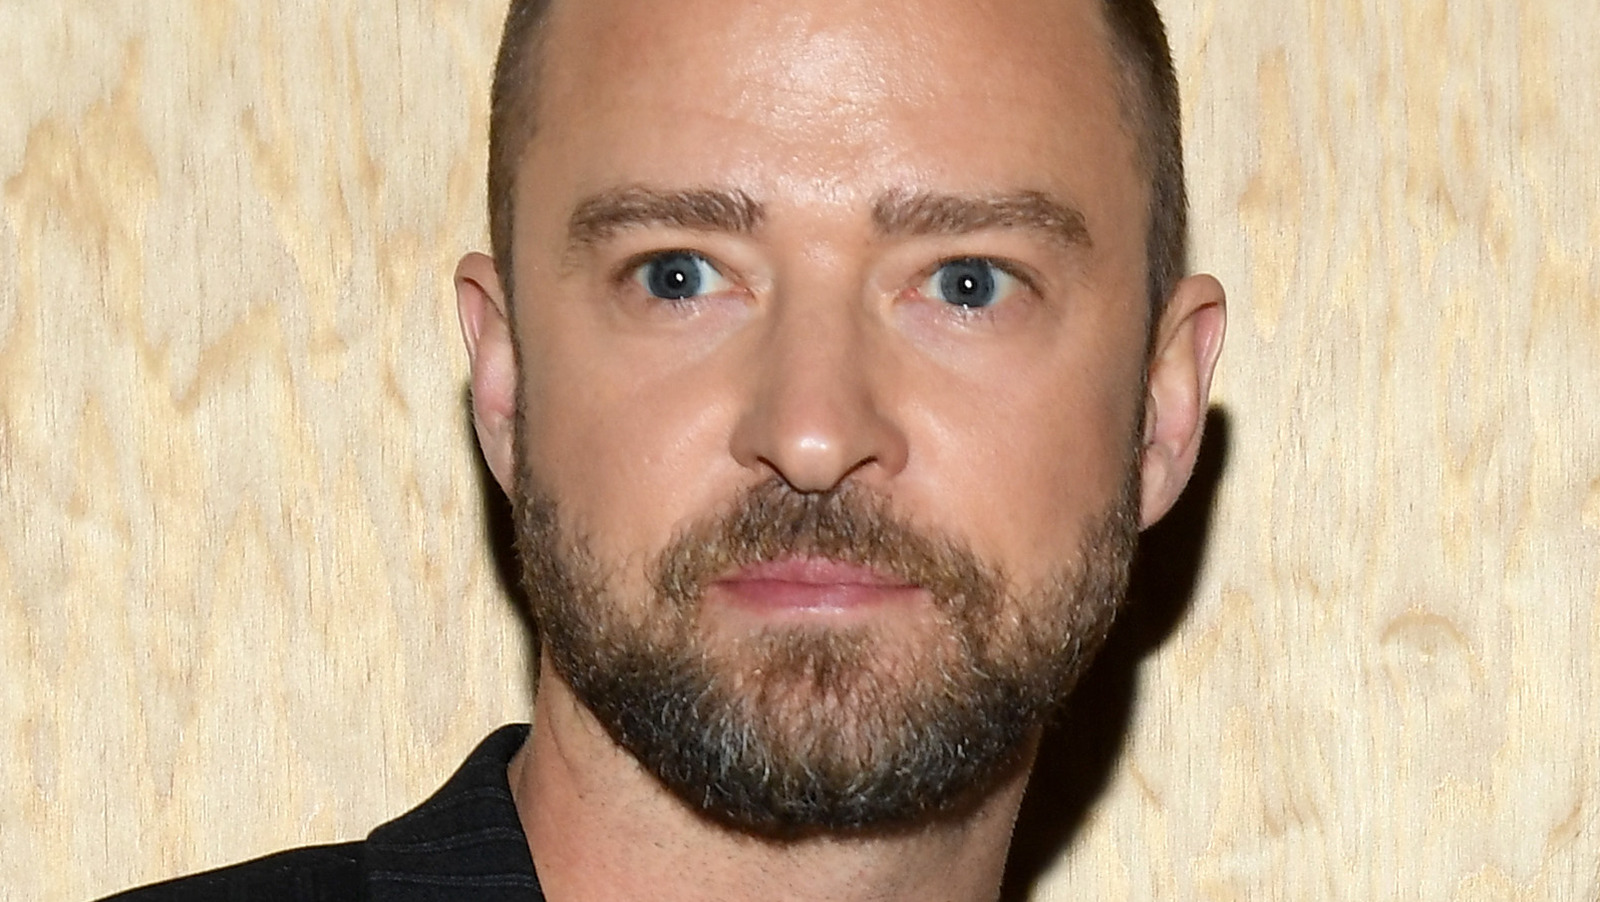 Justin Timberlake's downfall: From Britney Spears to Janet Jackson to now.